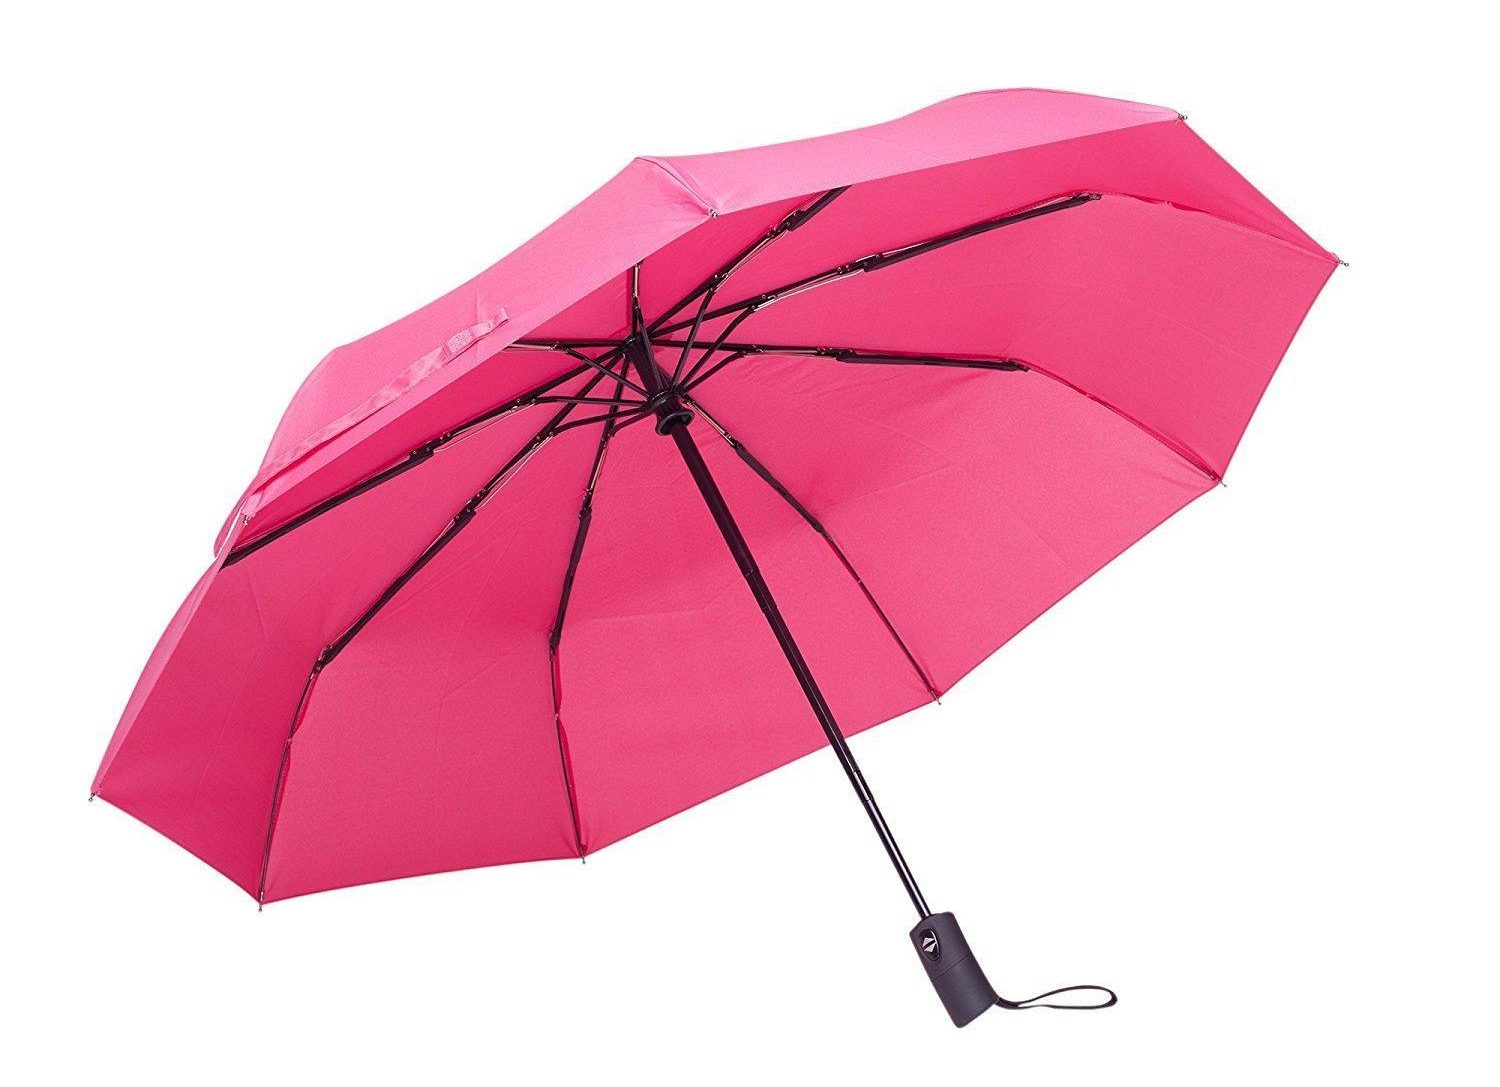 Strong, sturdy and pretty in pink makes the Rain-Mate Travel Umbrella an all-round winner